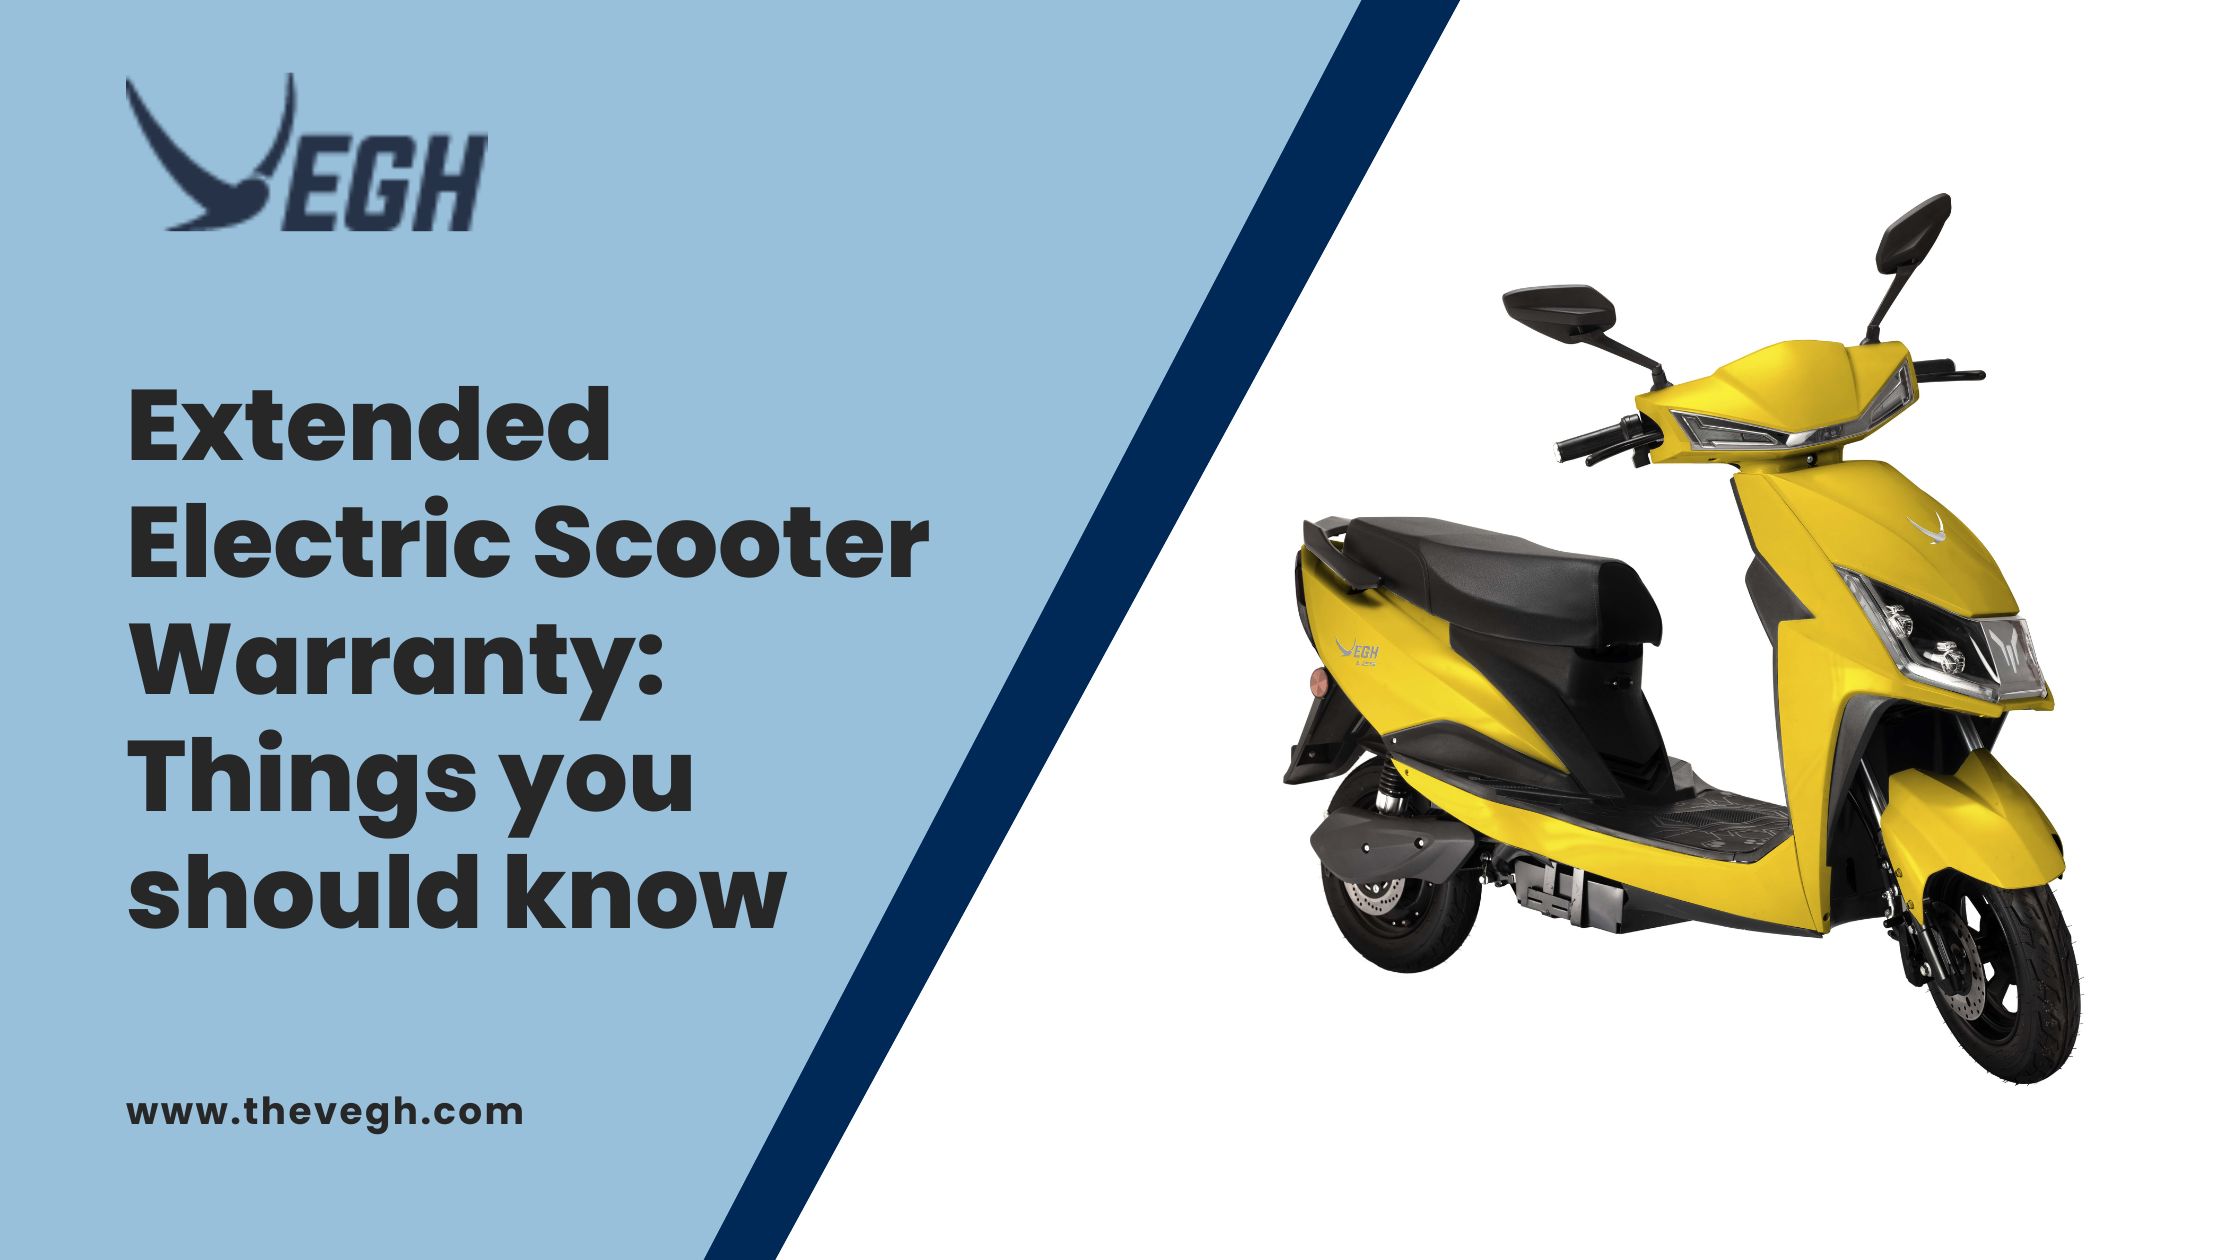 Extended Electric Scooter Warranty: Things you should know